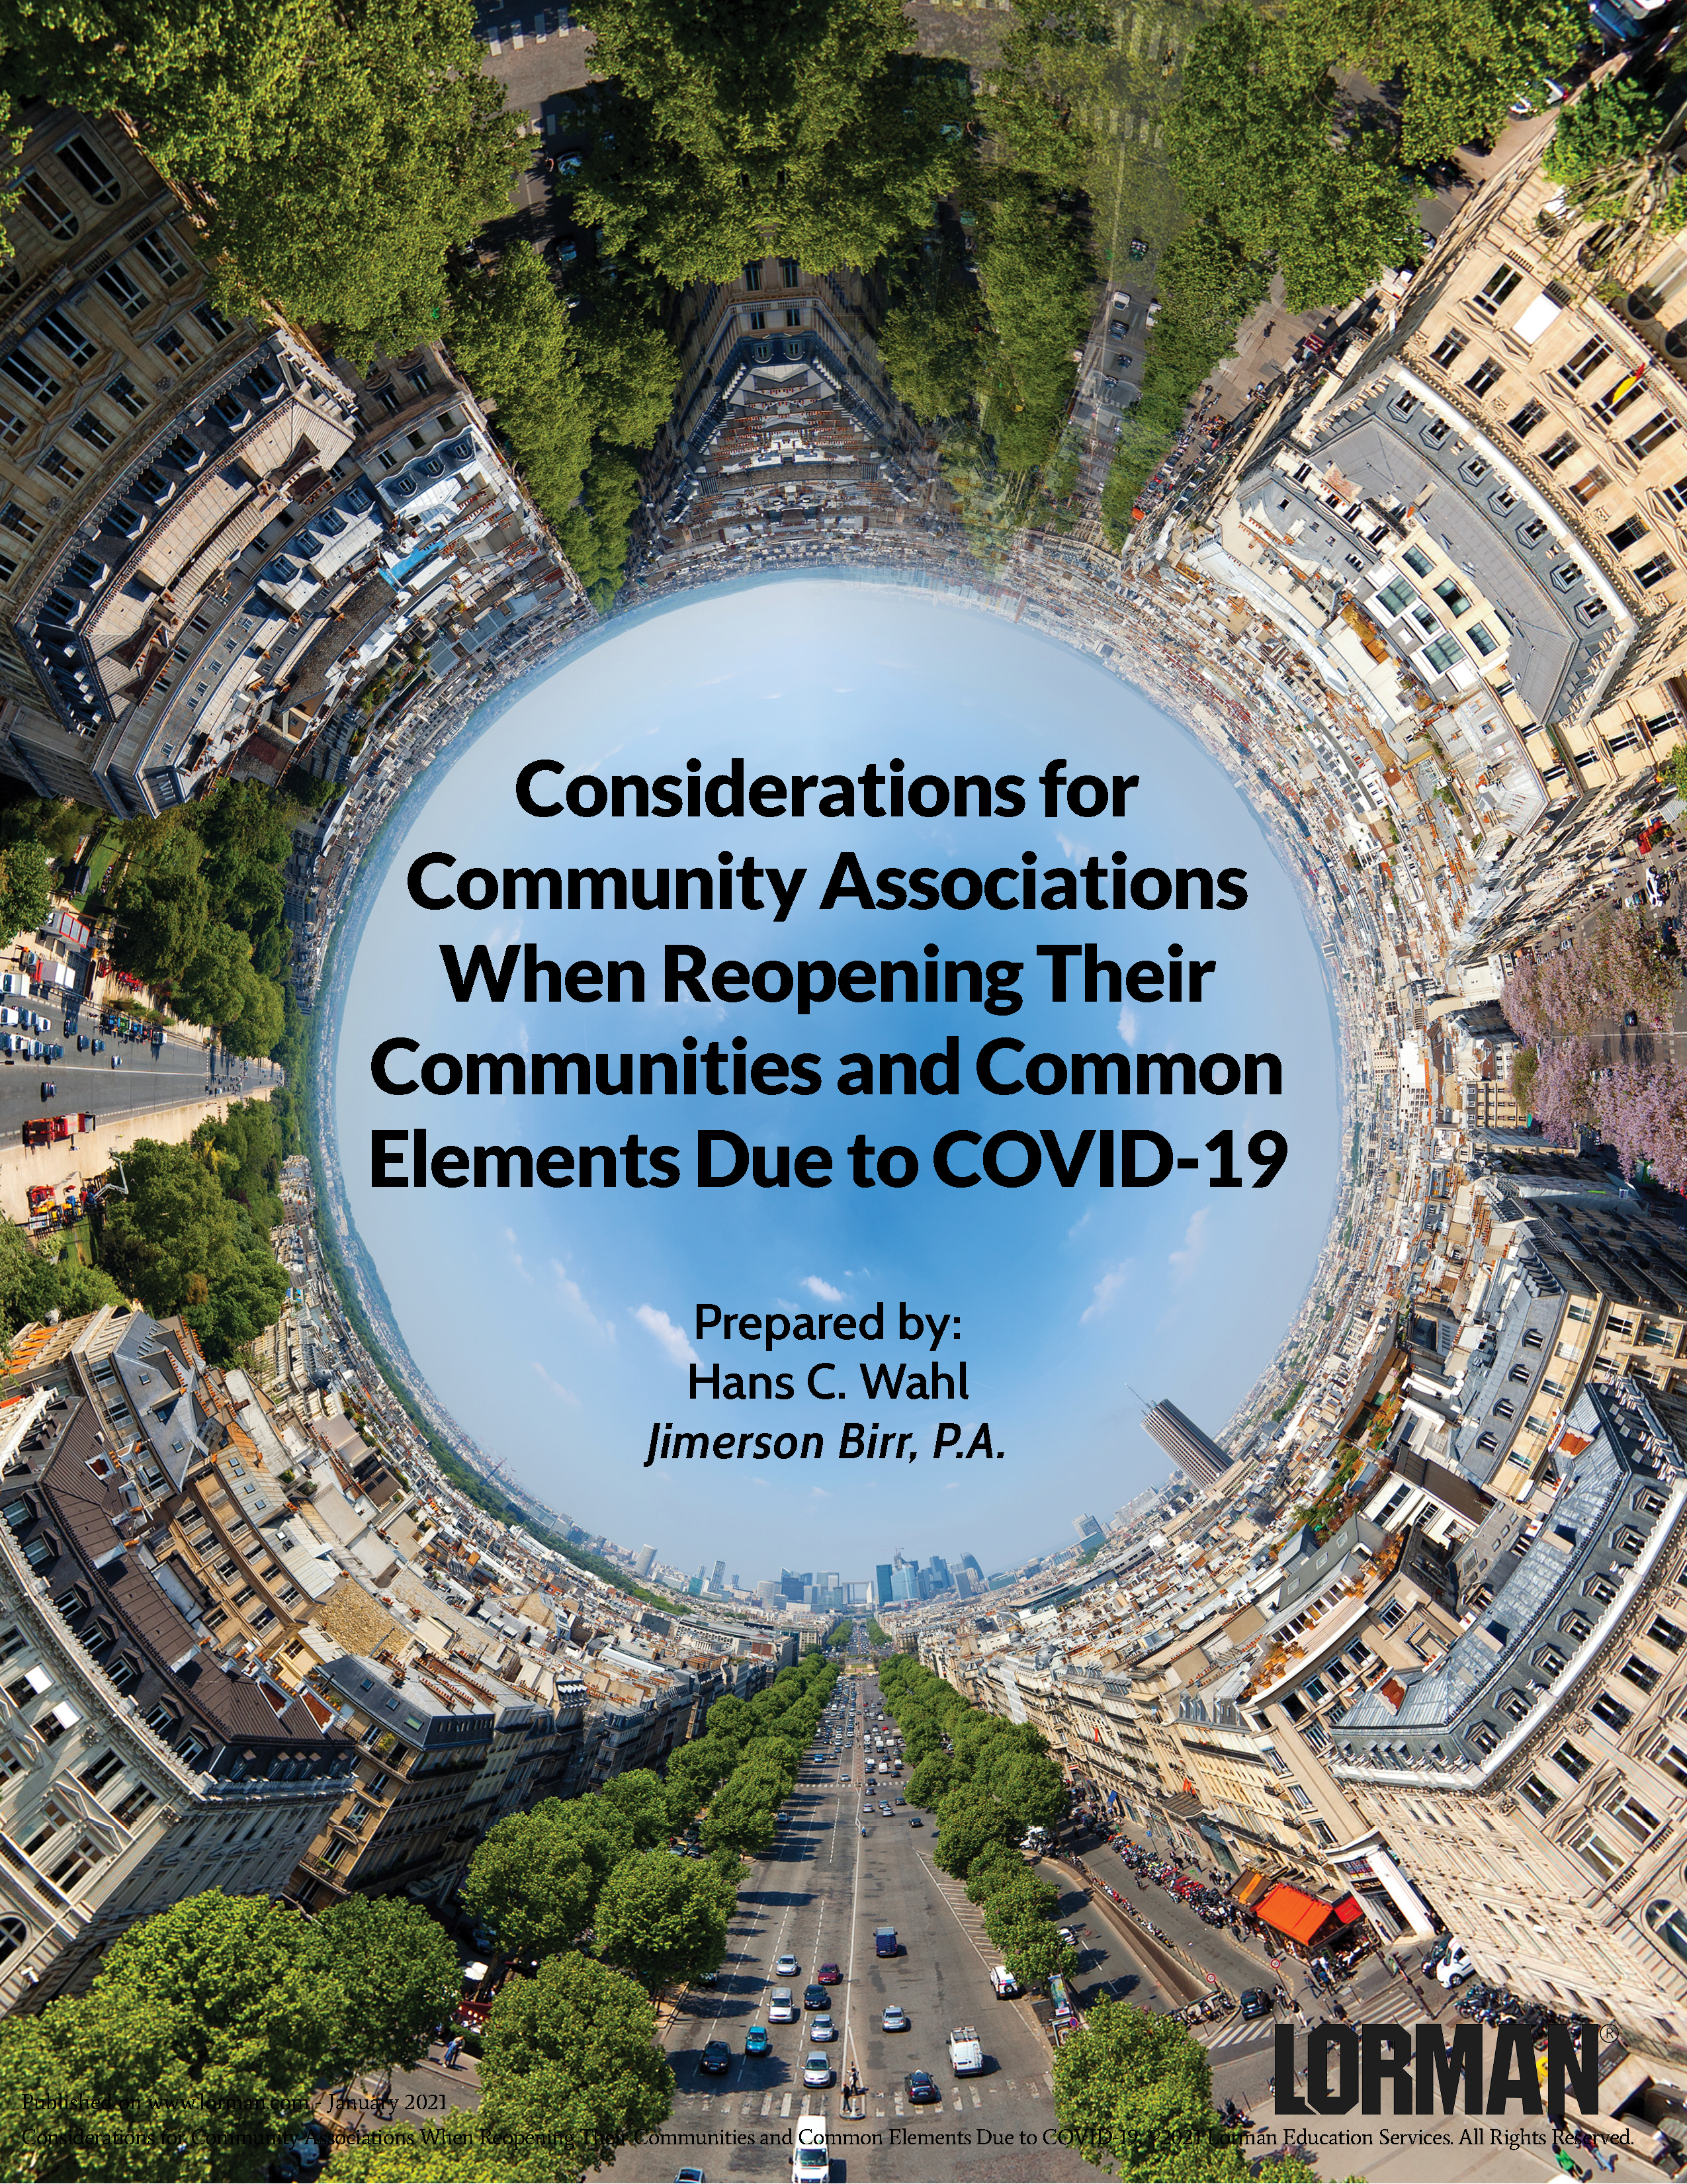 Considerations for Community Associations When Reopening Their Communities